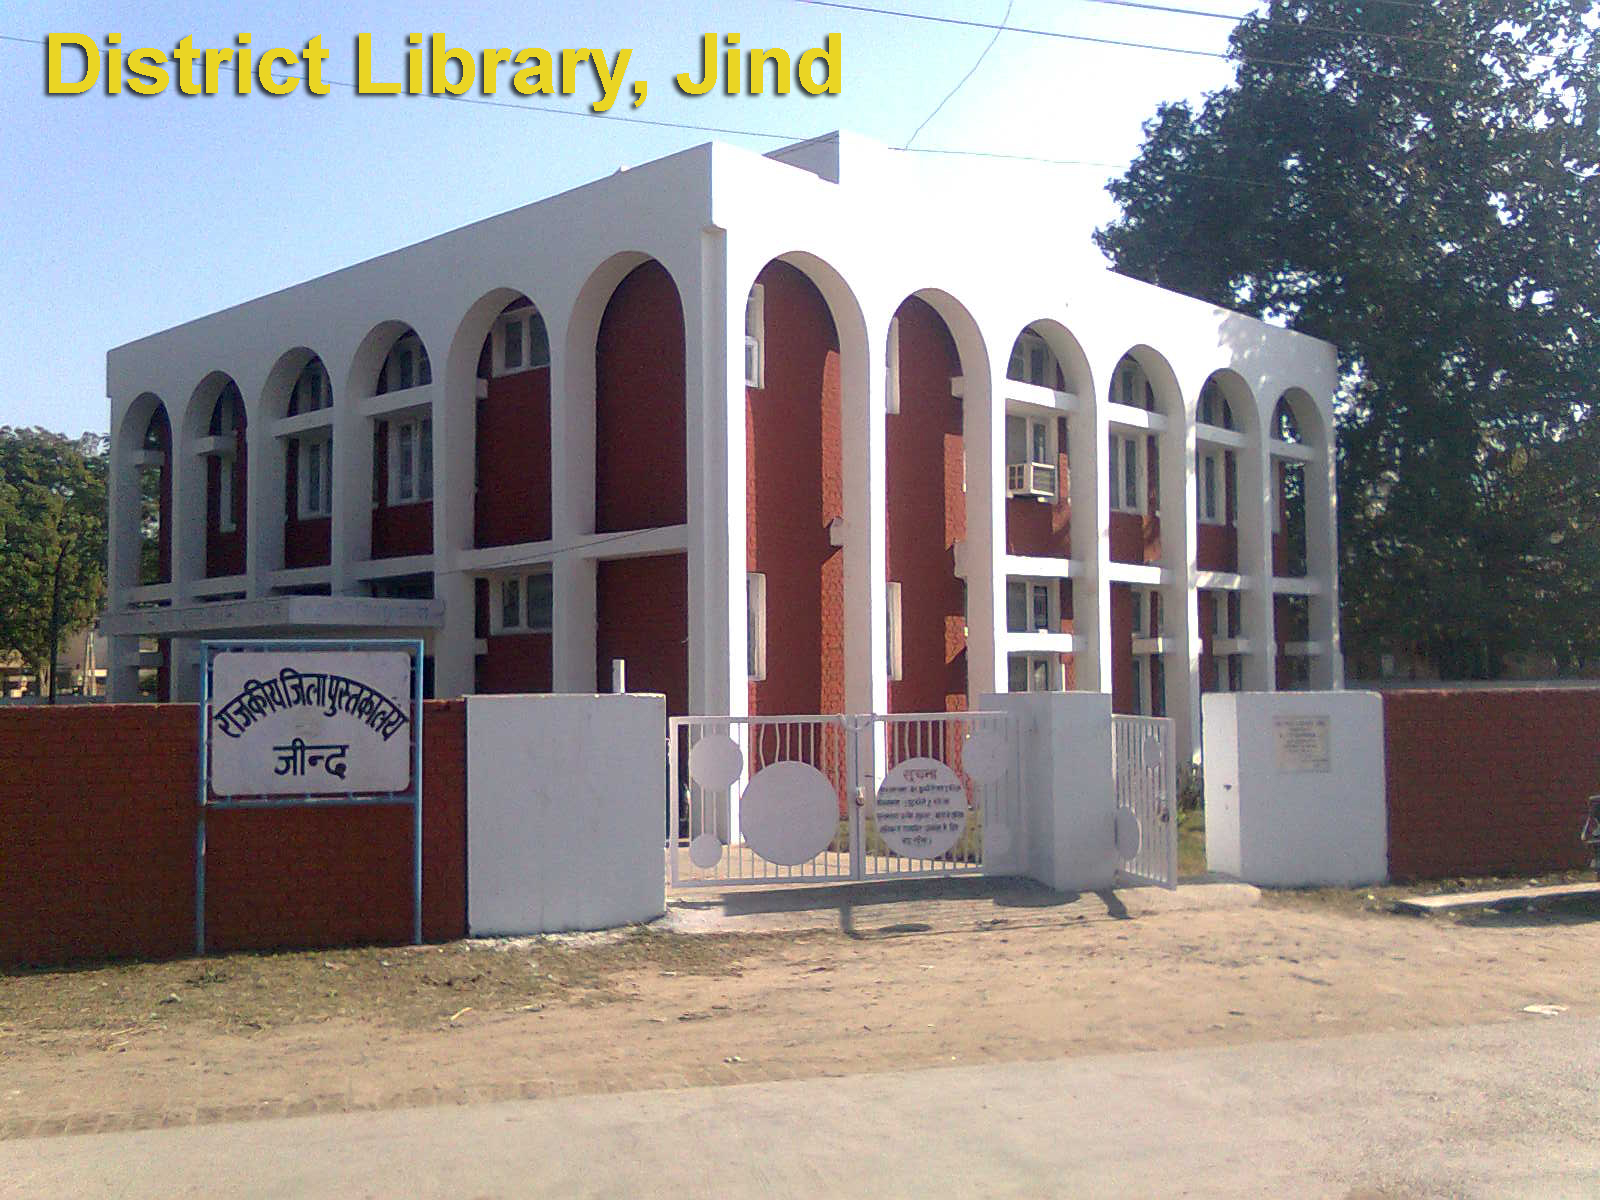 District Library, Jind